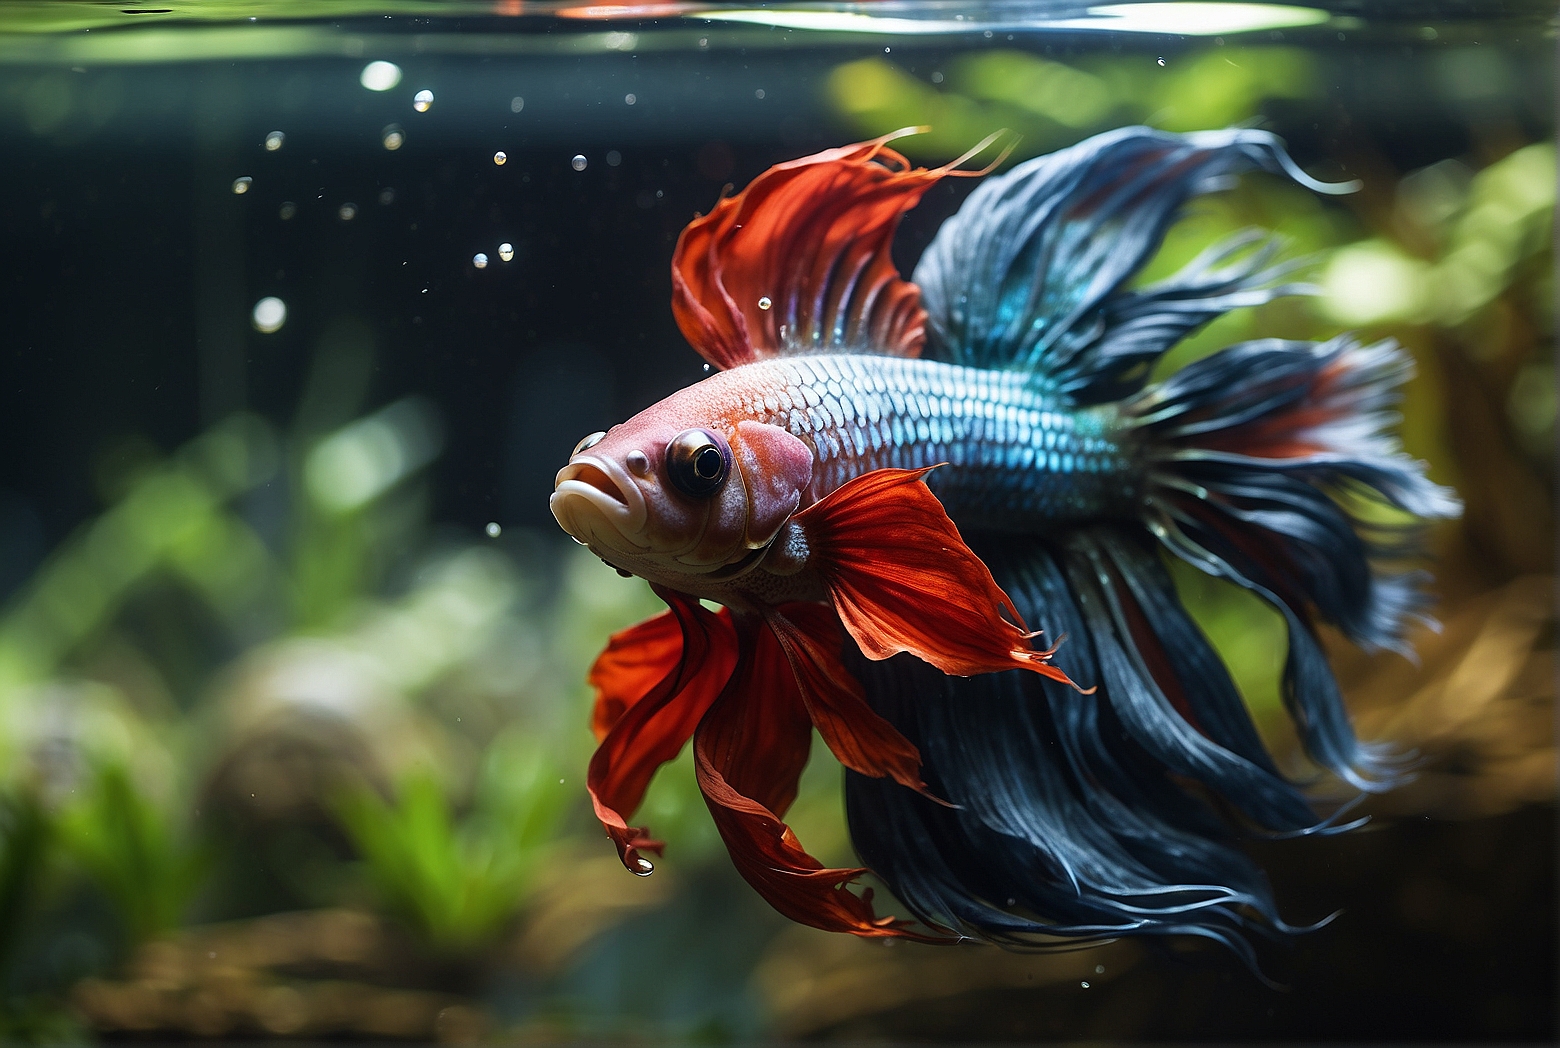 Choosing the Right Water for Betta Fish